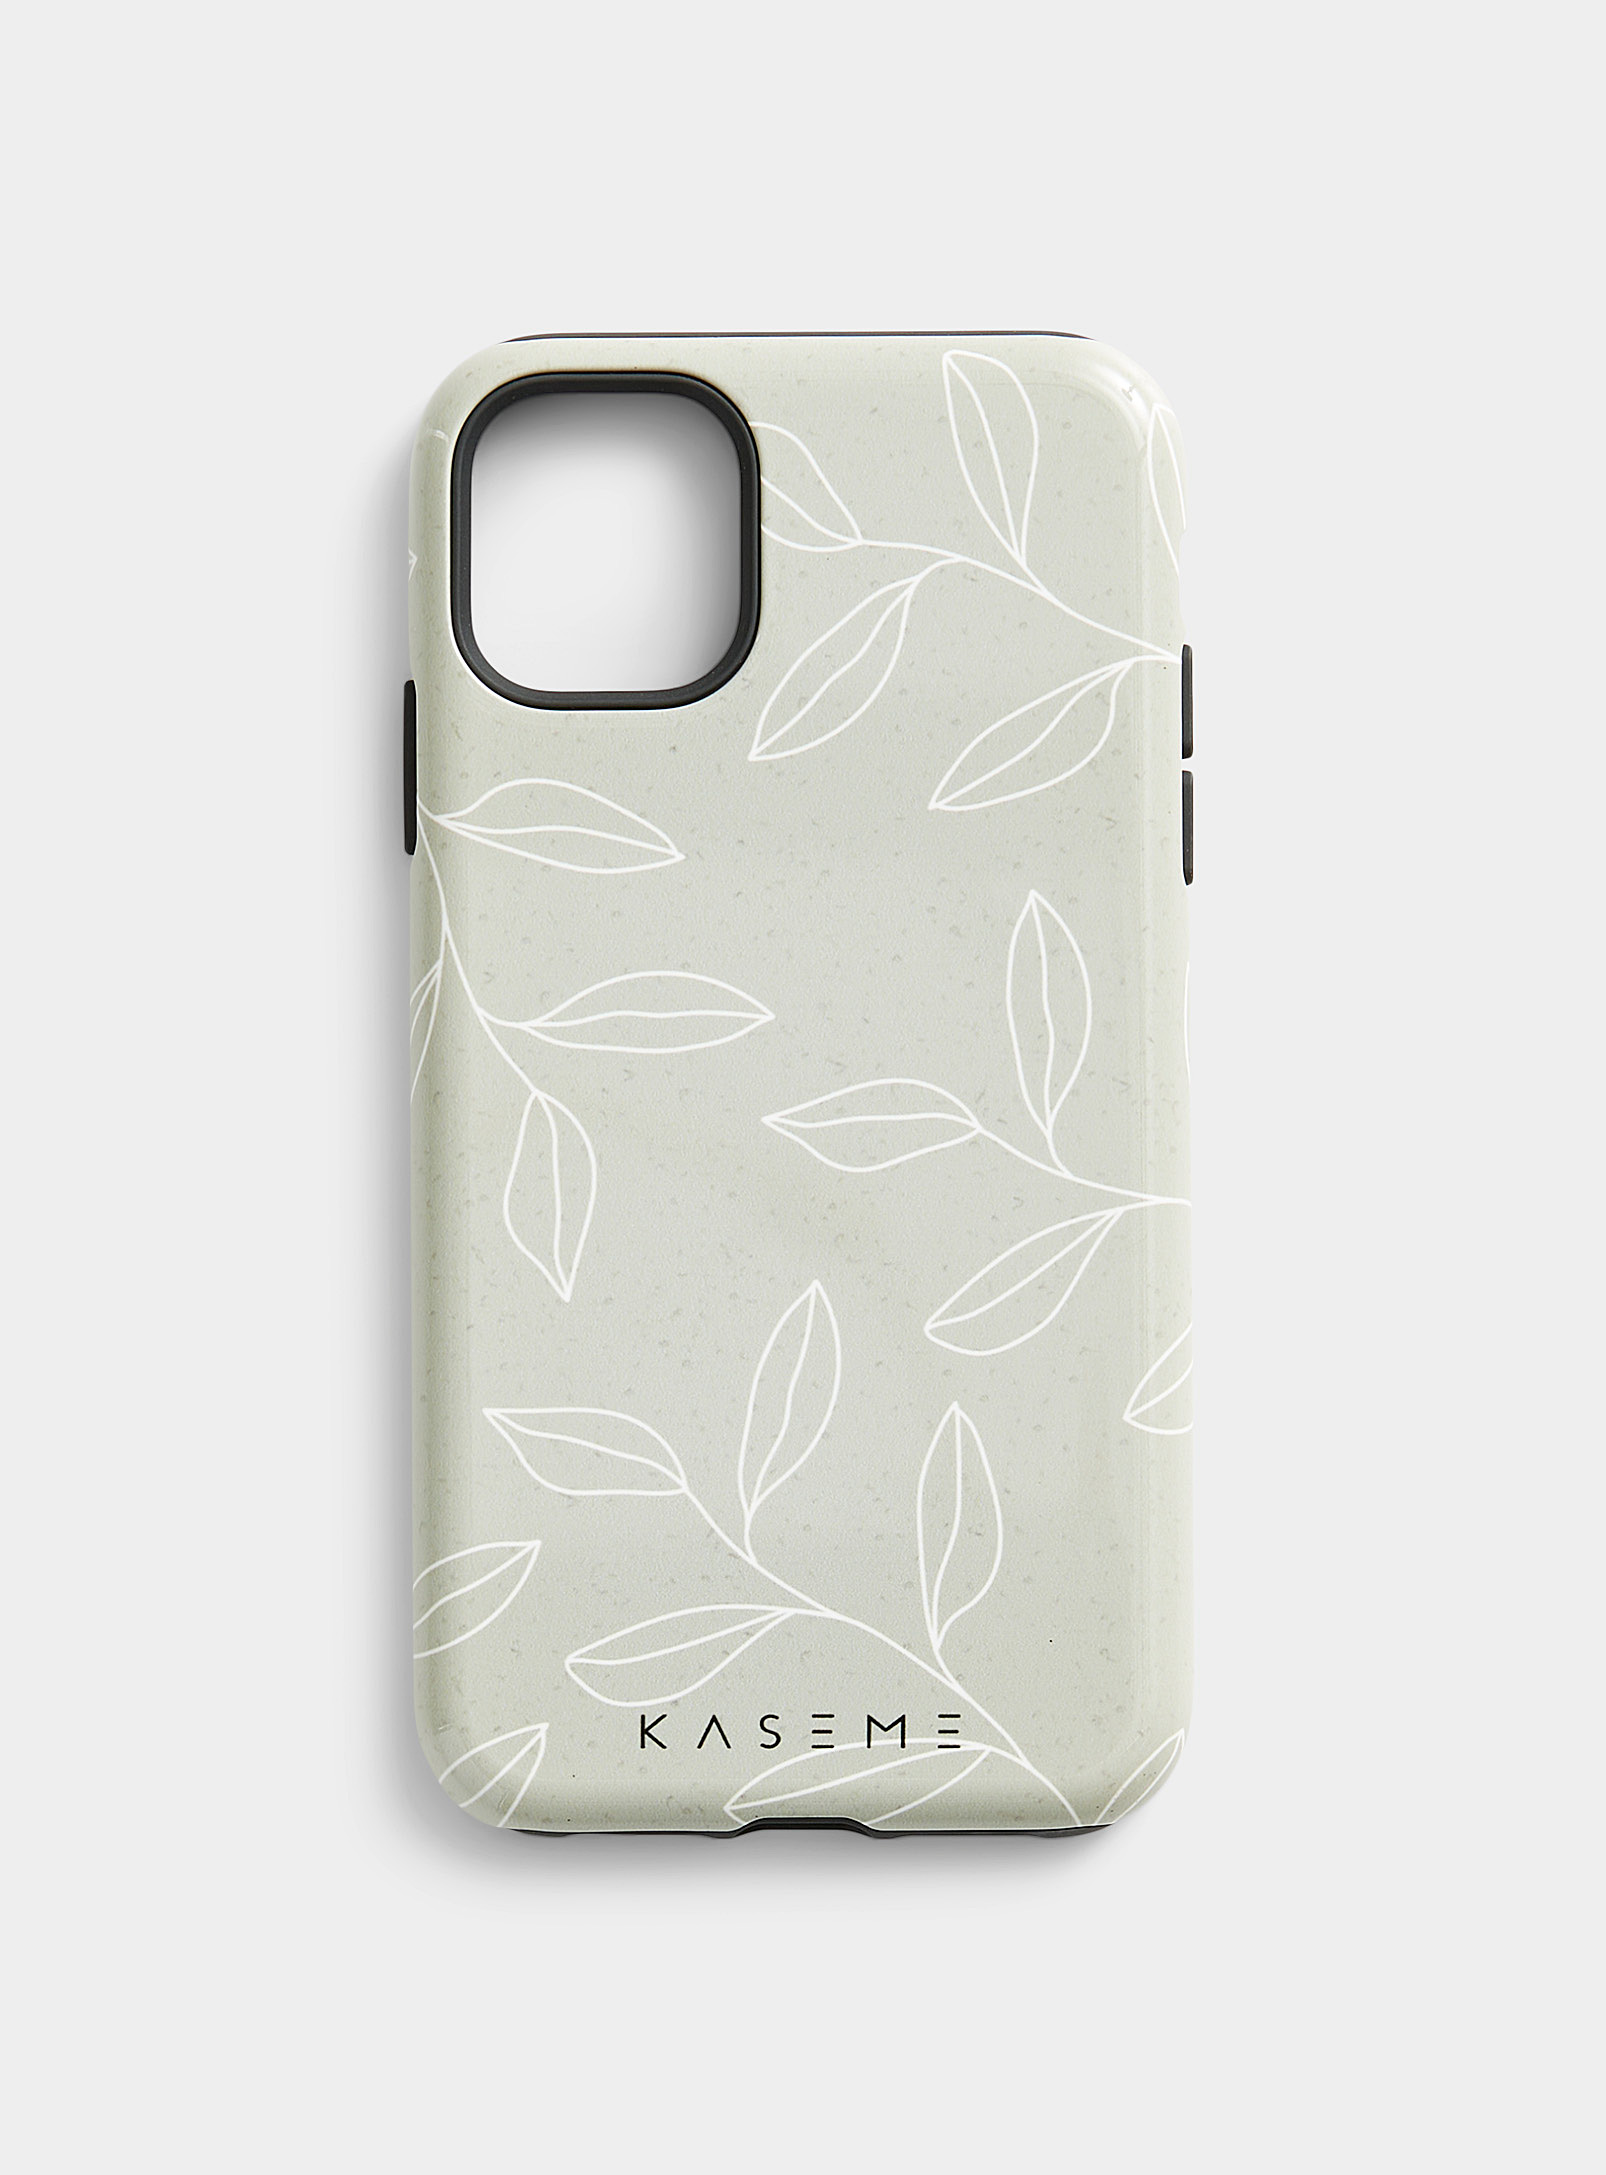 Kaseme Patterned Case For Iphone 11 In Mossy Green